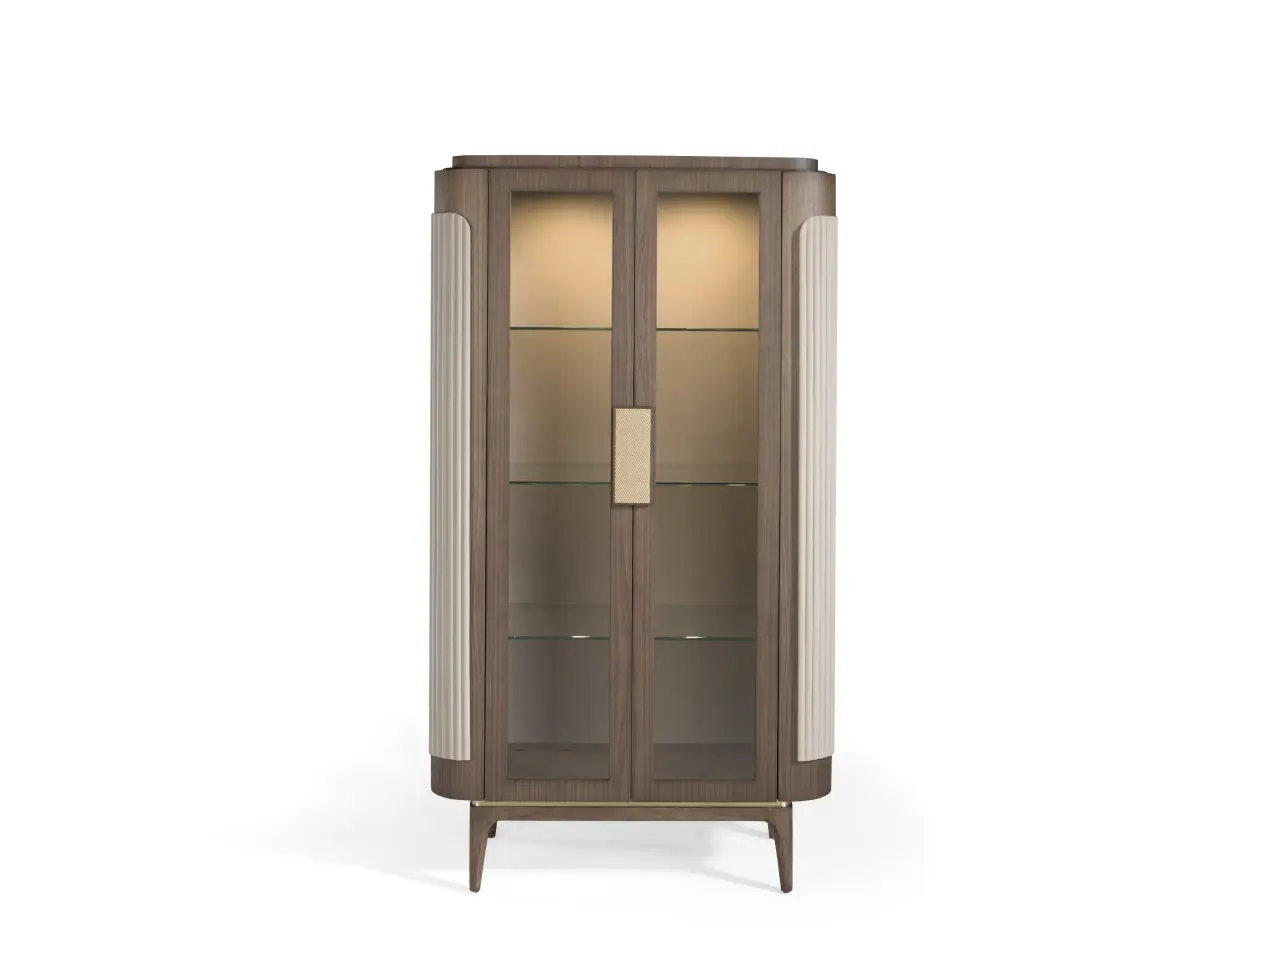 soher-sofia-collection-display-cabinet06